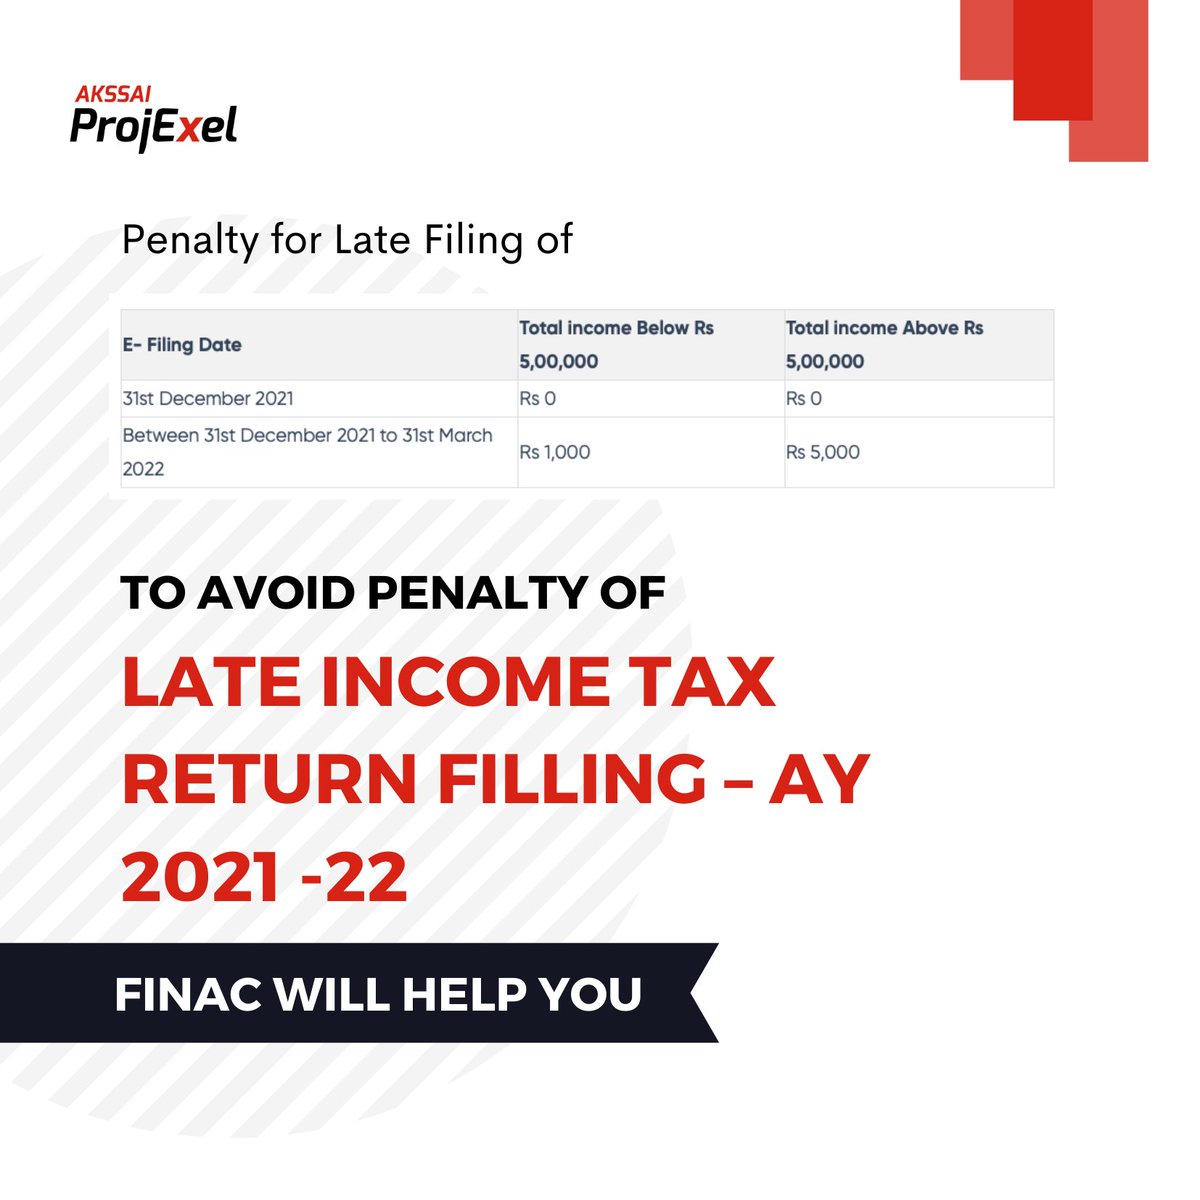 To avoid penalty of late Income Tax Return filling – AY 2021 -22
Finac will Help you.

#finac #accountingerrors #bookeeping #akssai